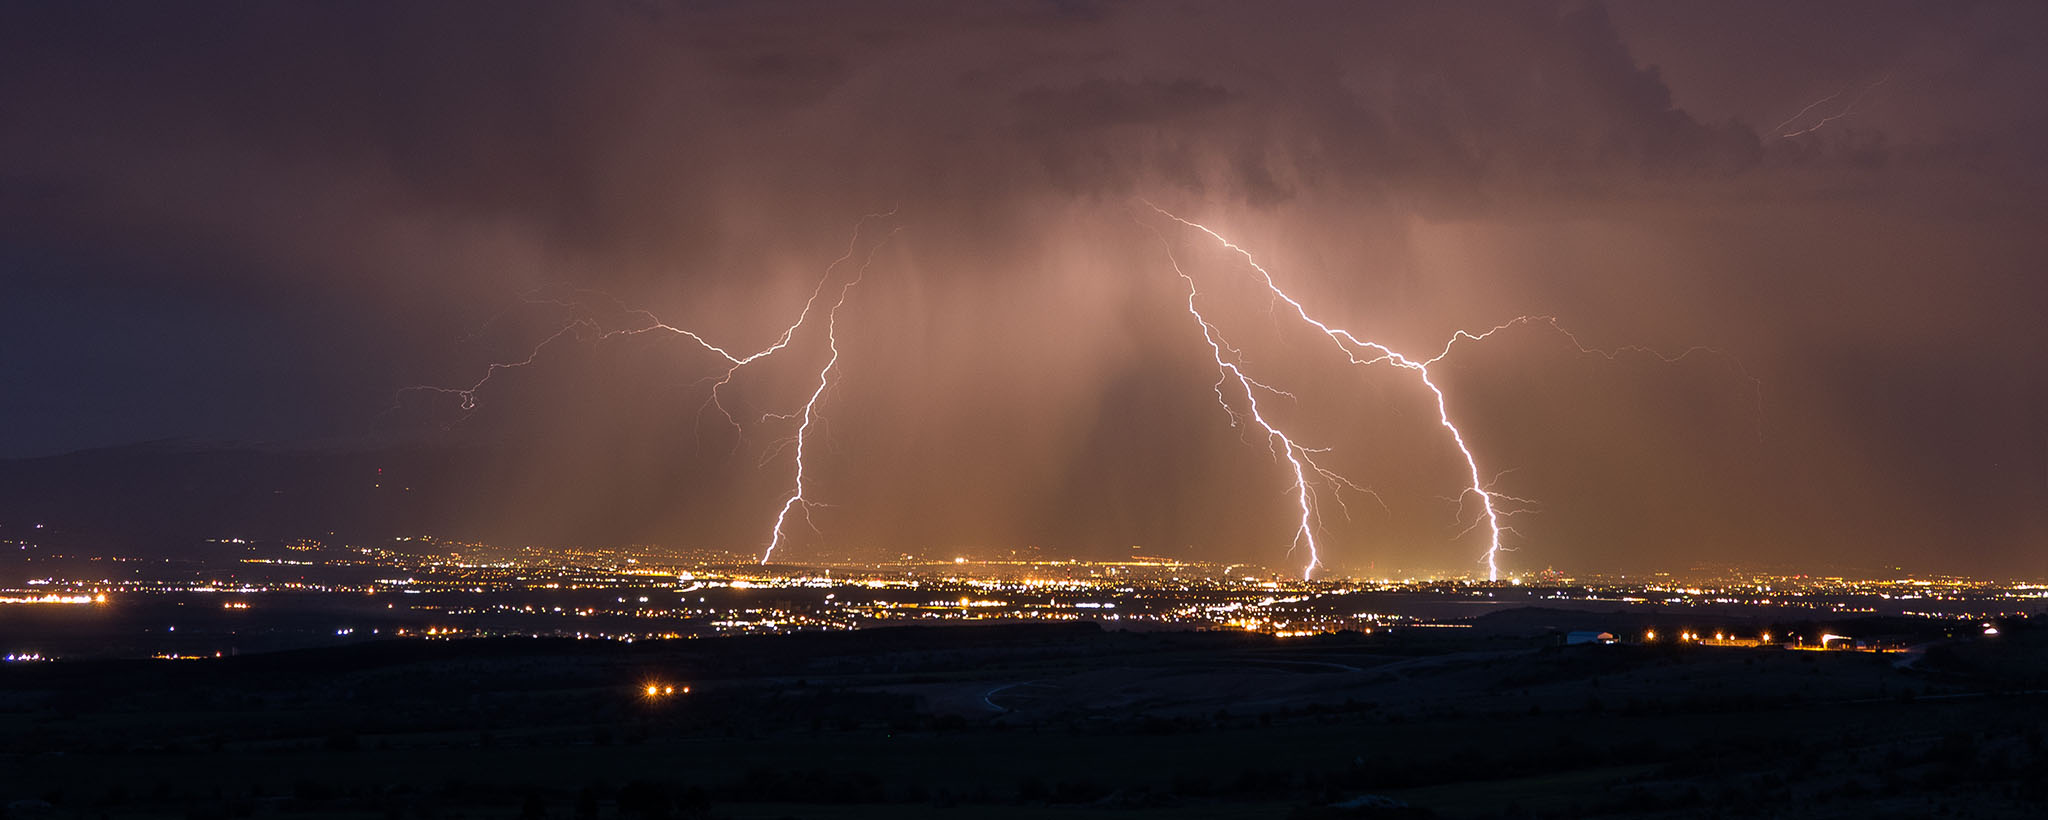 lightning striking a city in several places, as seen from afar